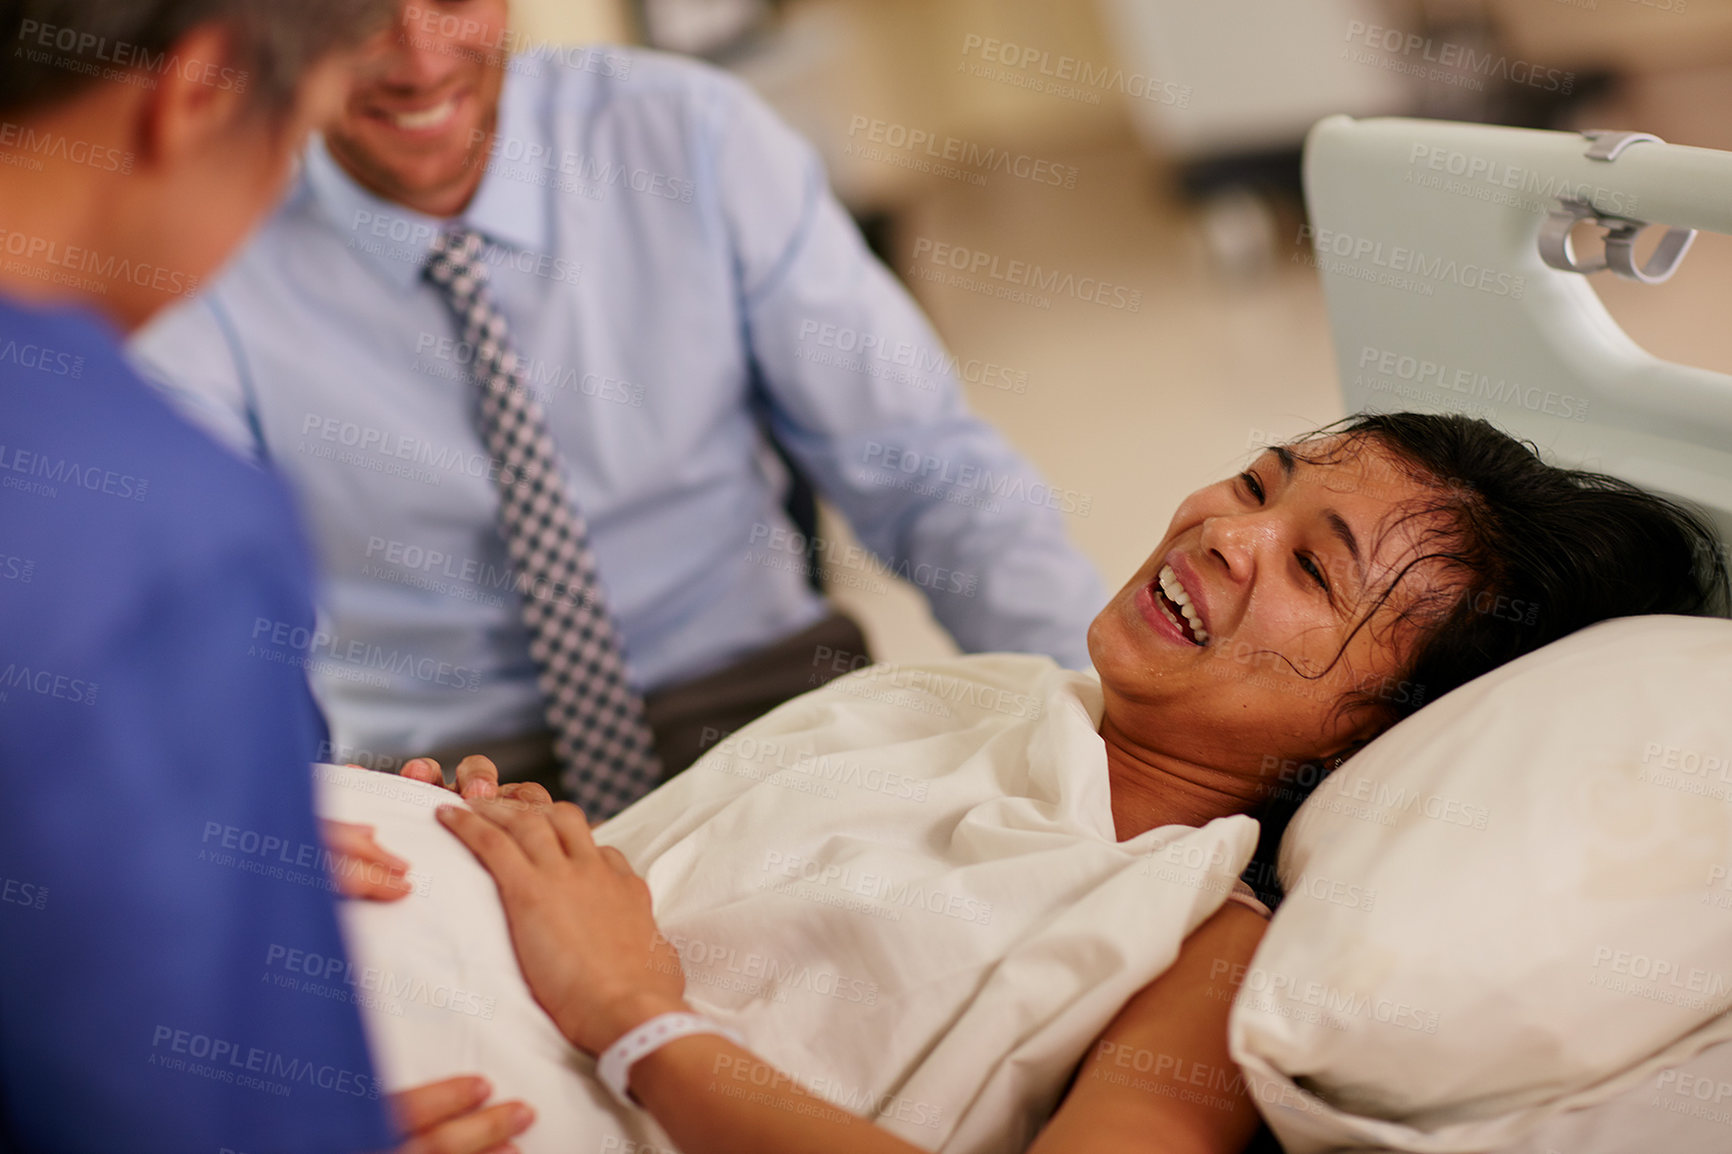 Buy stock photo Shot of a young woman lying in hospital with her husband in the background